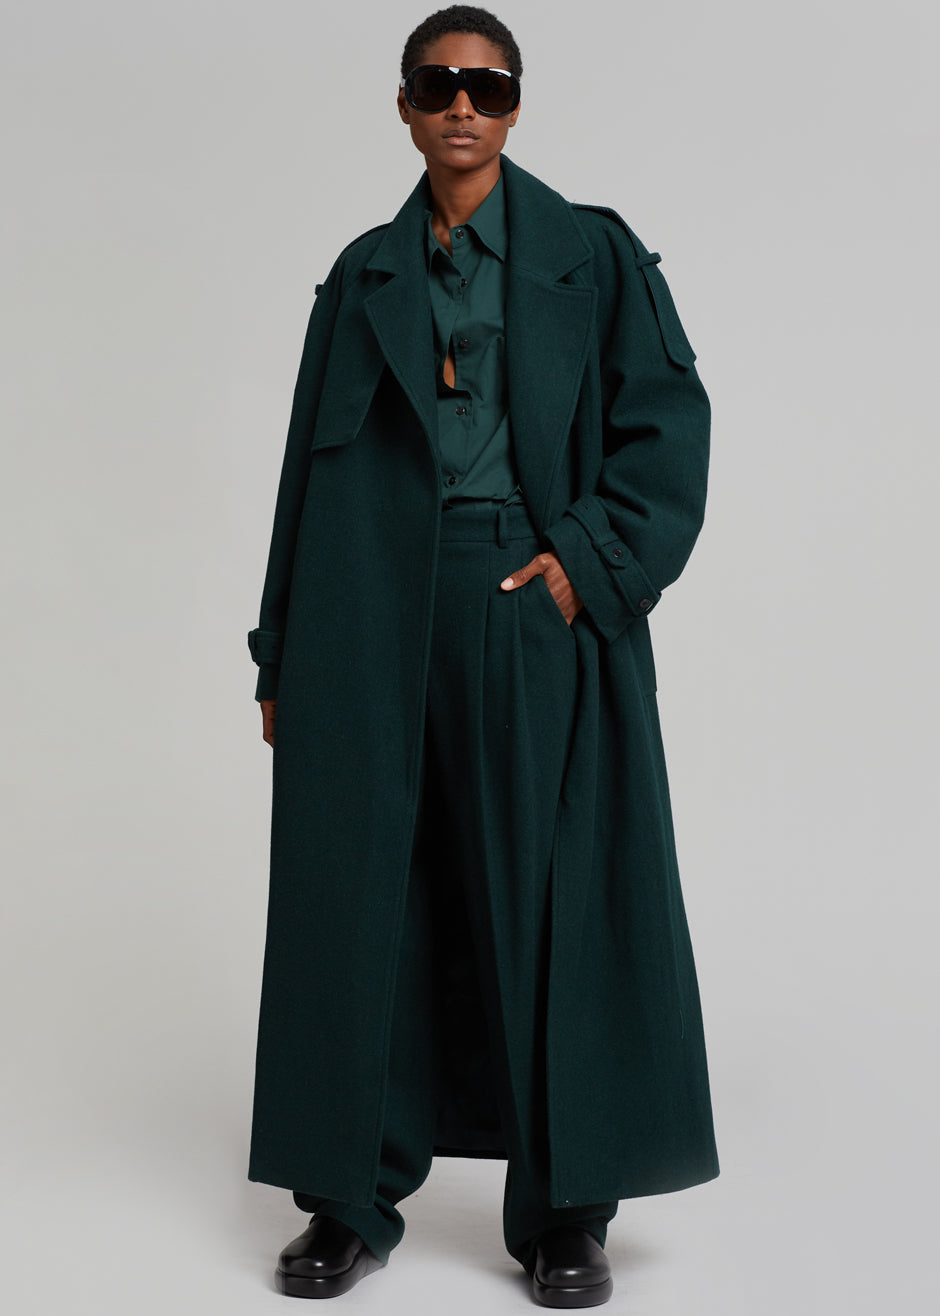 Suzanne Wool Trench Coat - Bottle Green - 2